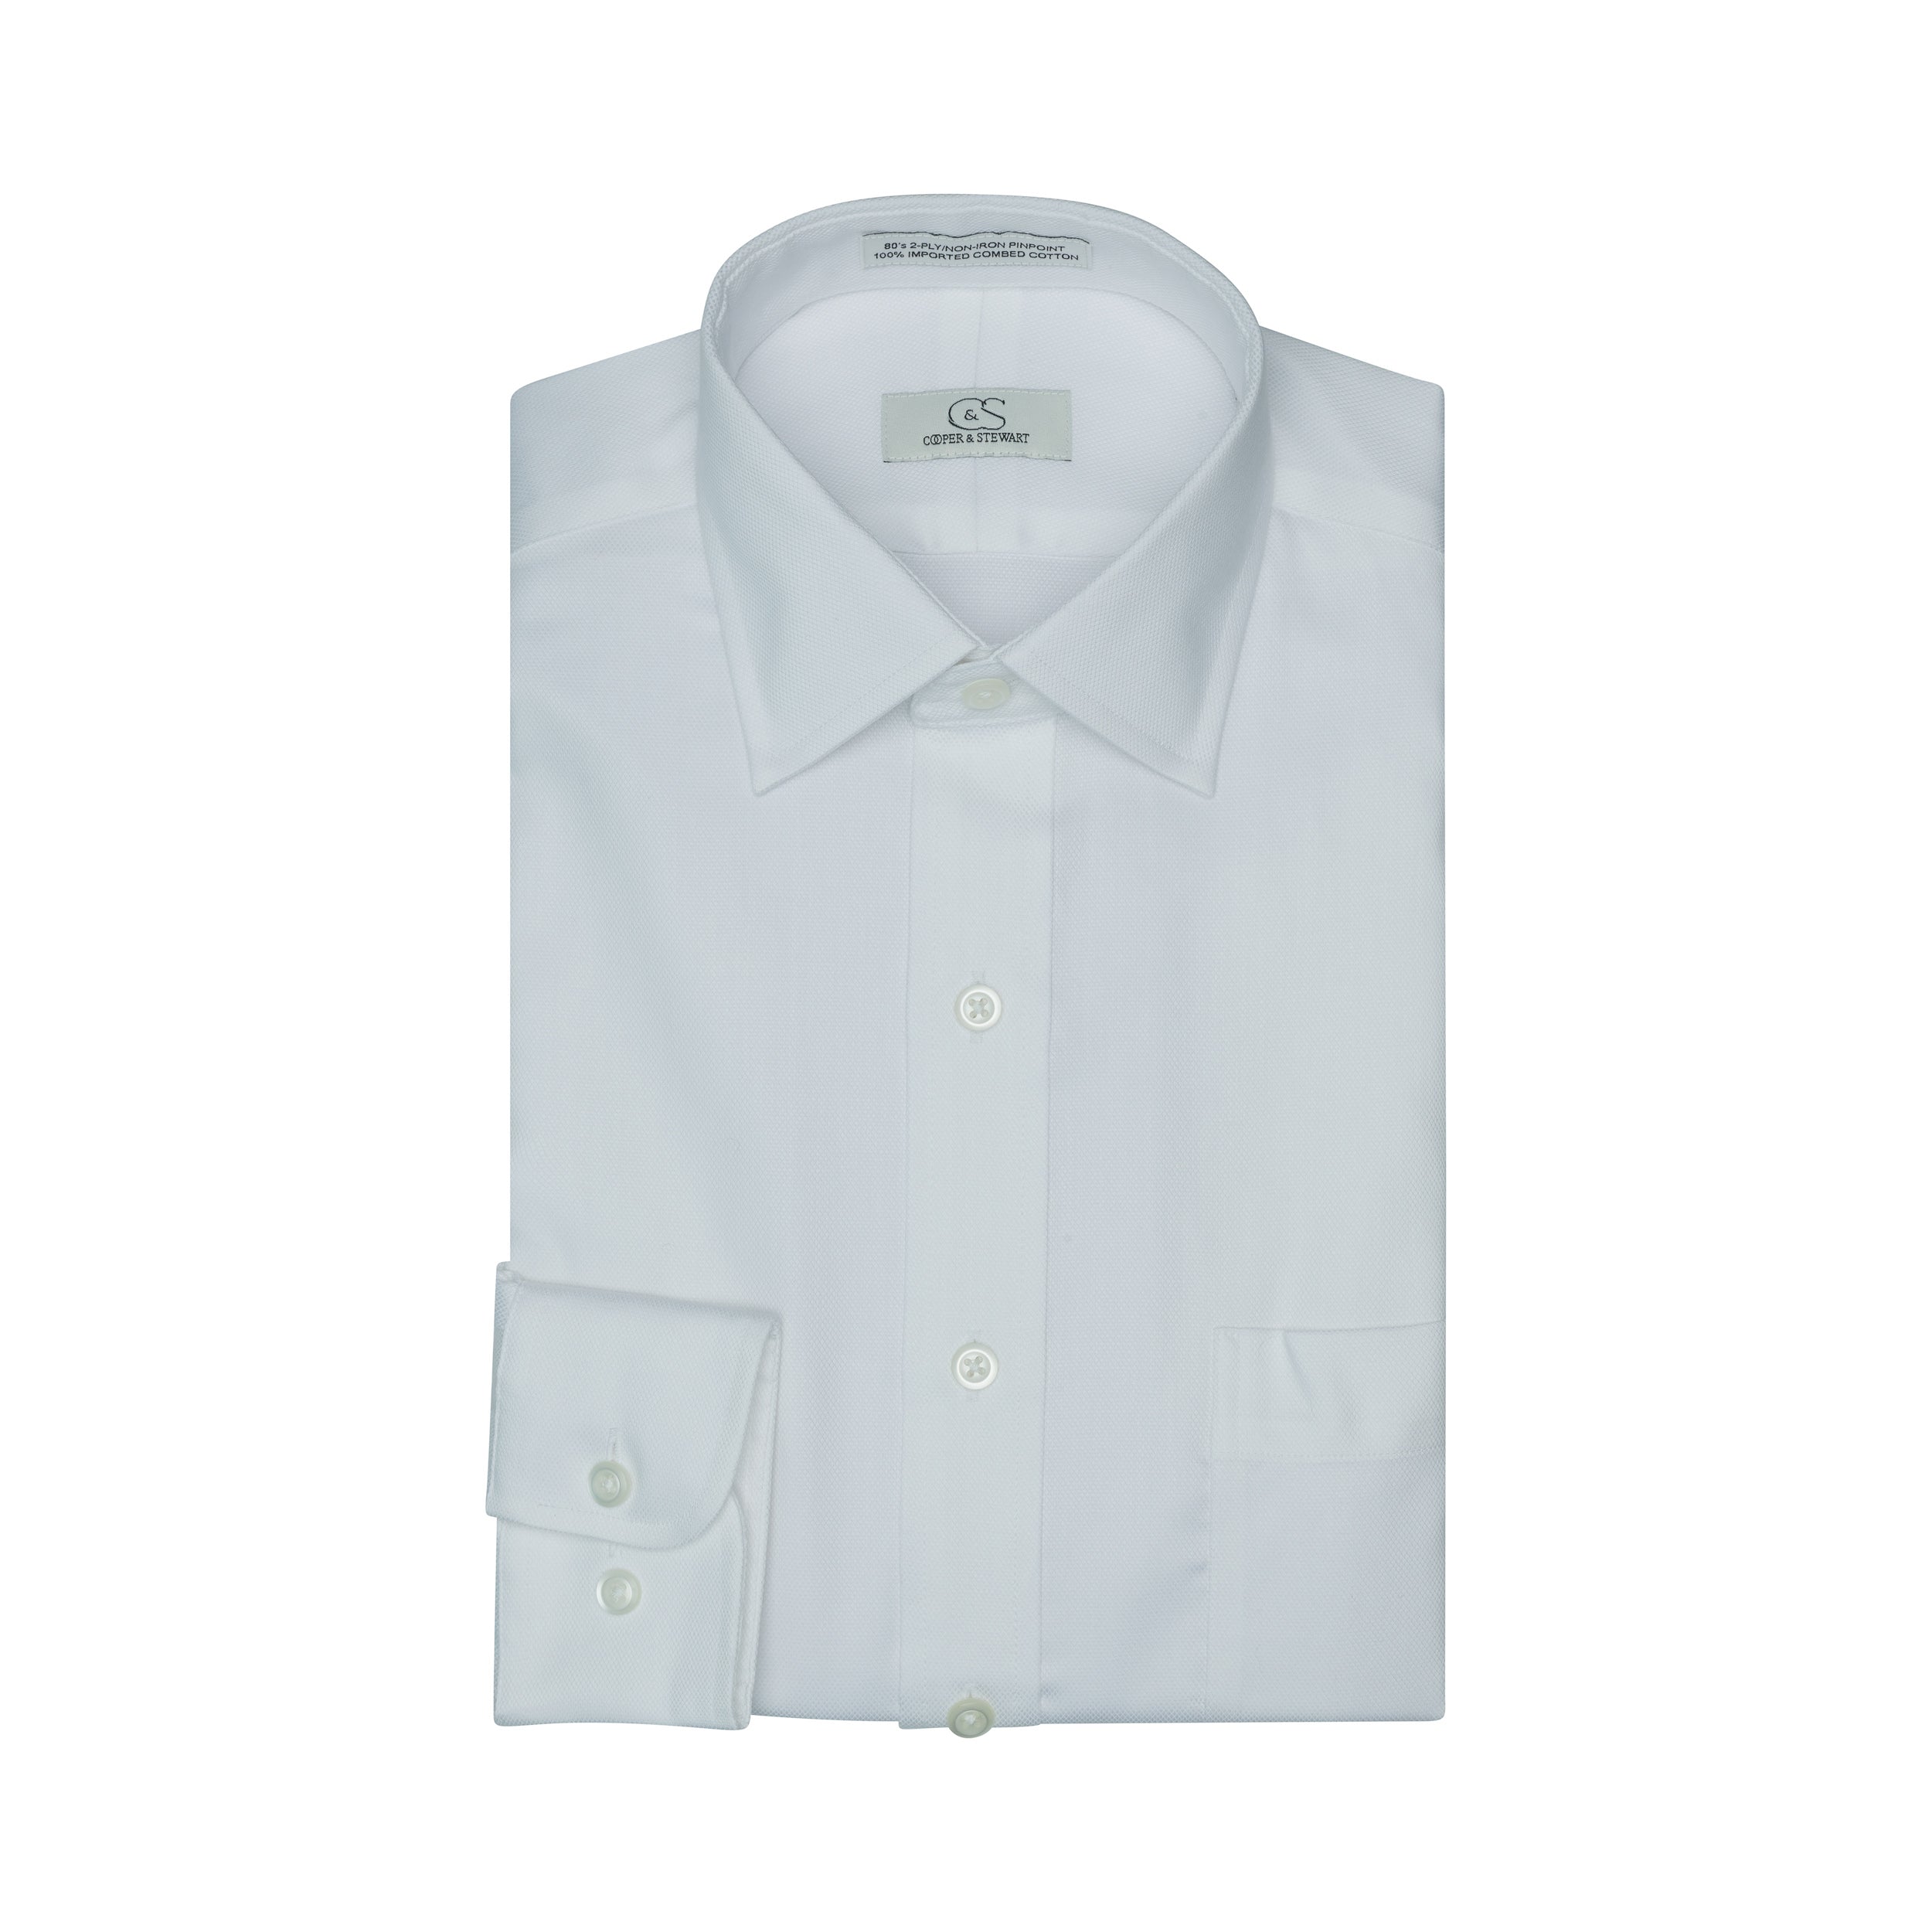 005 TF SC - White Royal Oxford Tailored Fit Spread Collar